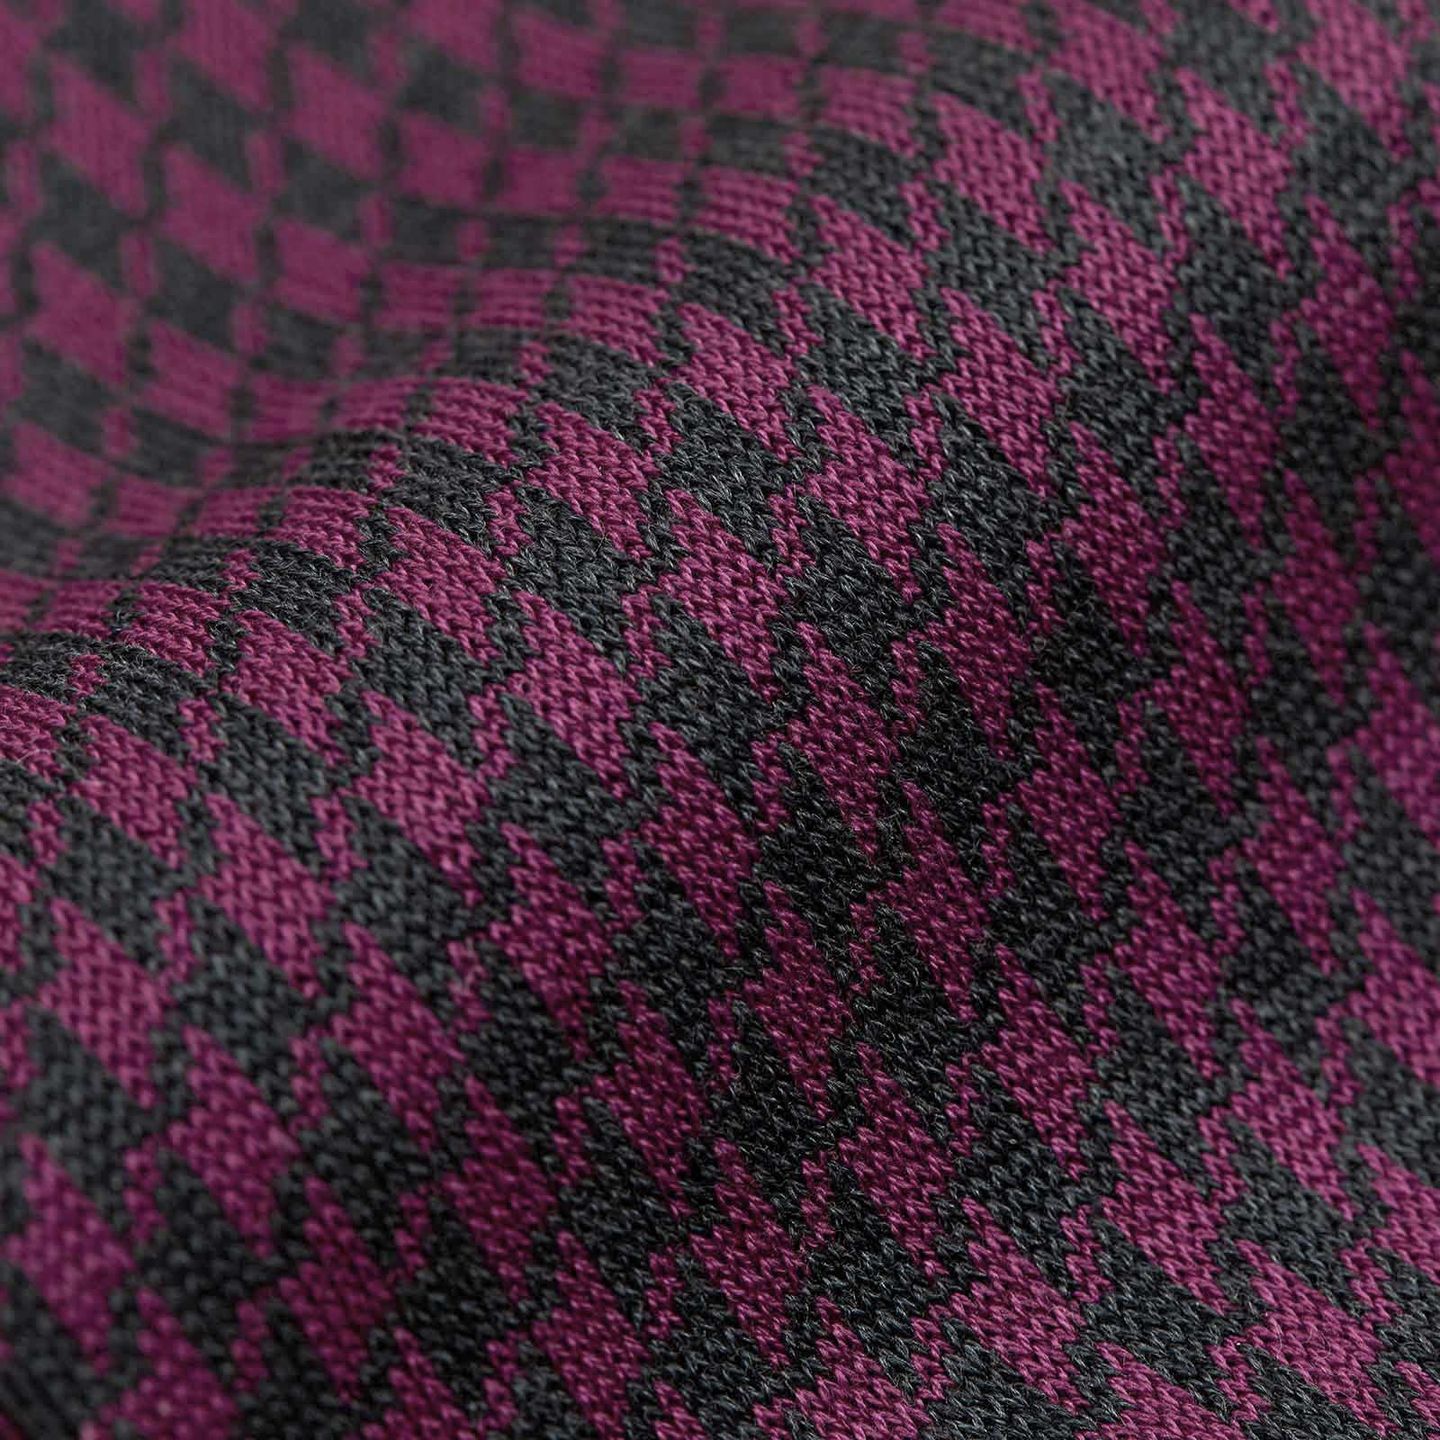 Close up of the mulberry and black Houndstooth patterned socks